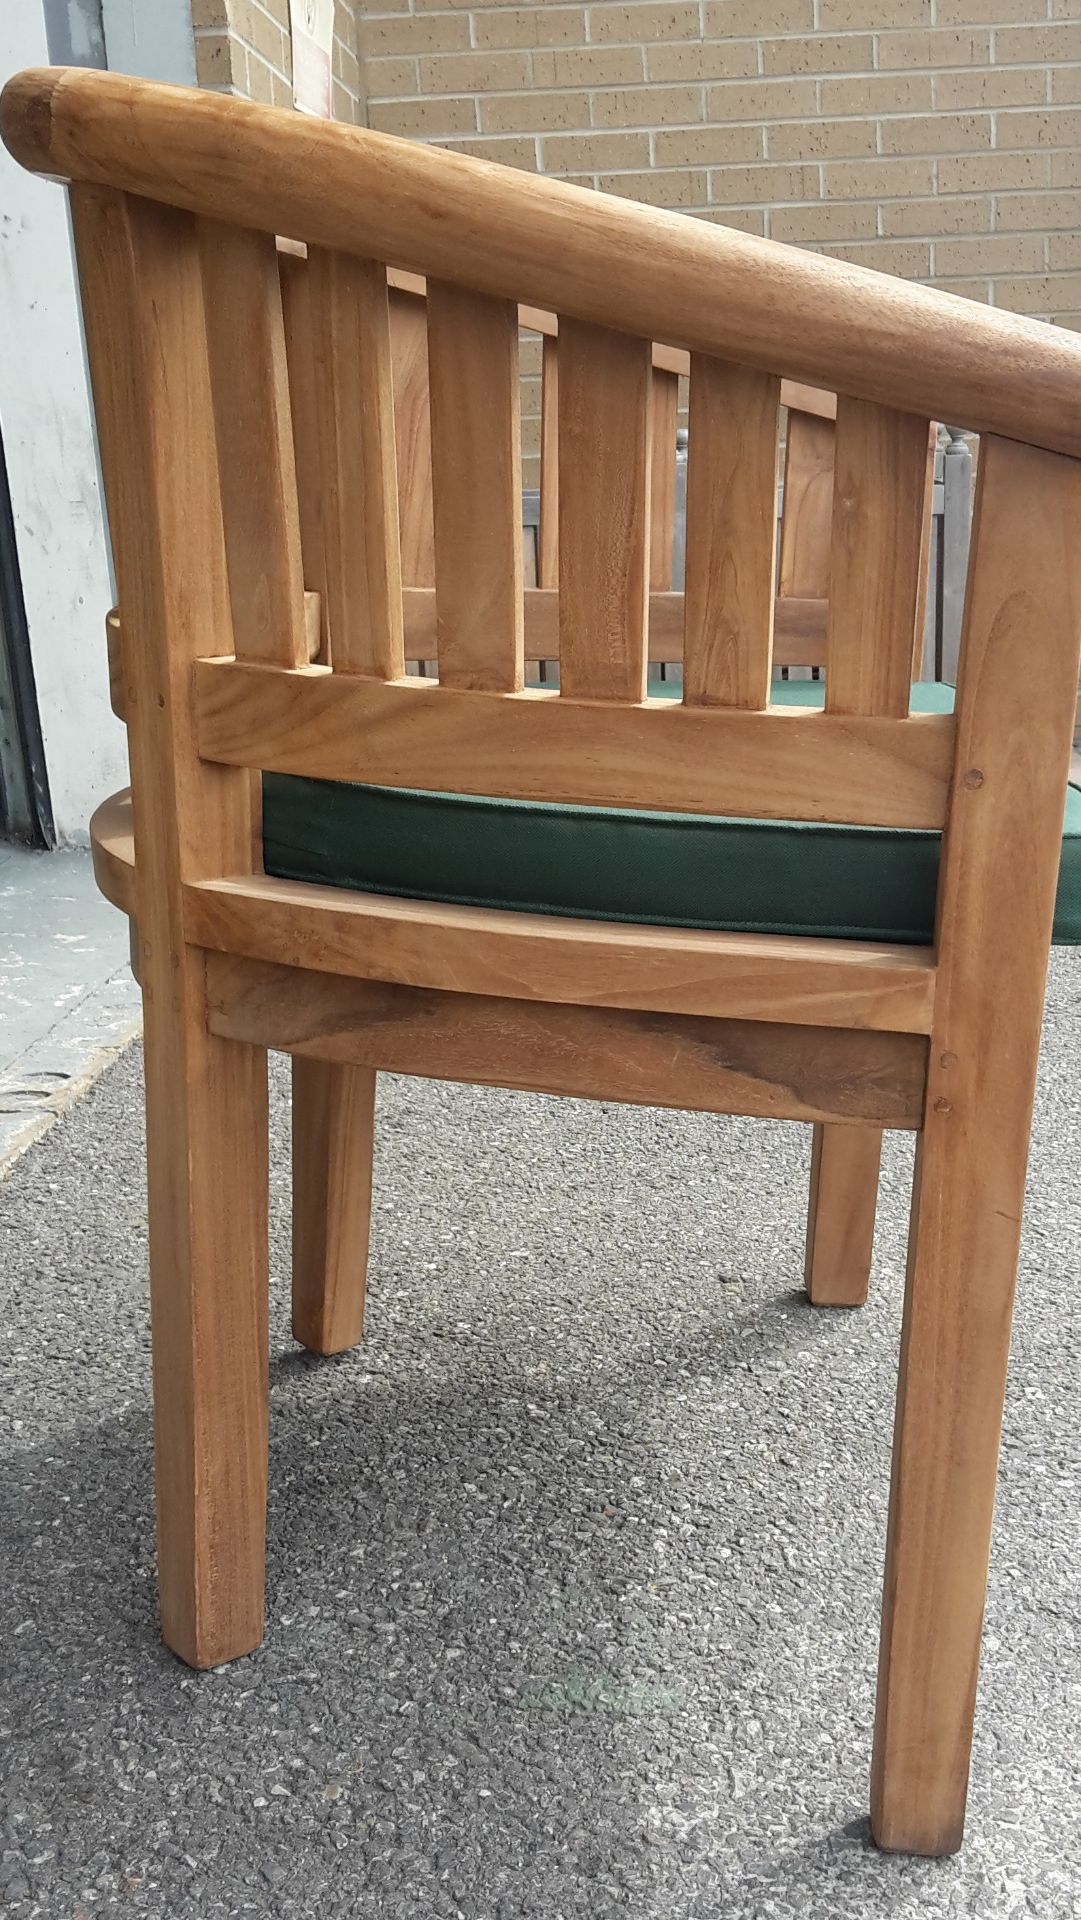 V Brand New TEAK Lutyens Garden Chair - Made From Grade A Plantation Teak RRP £199 NOTE: Item Is - Image 4 of 5